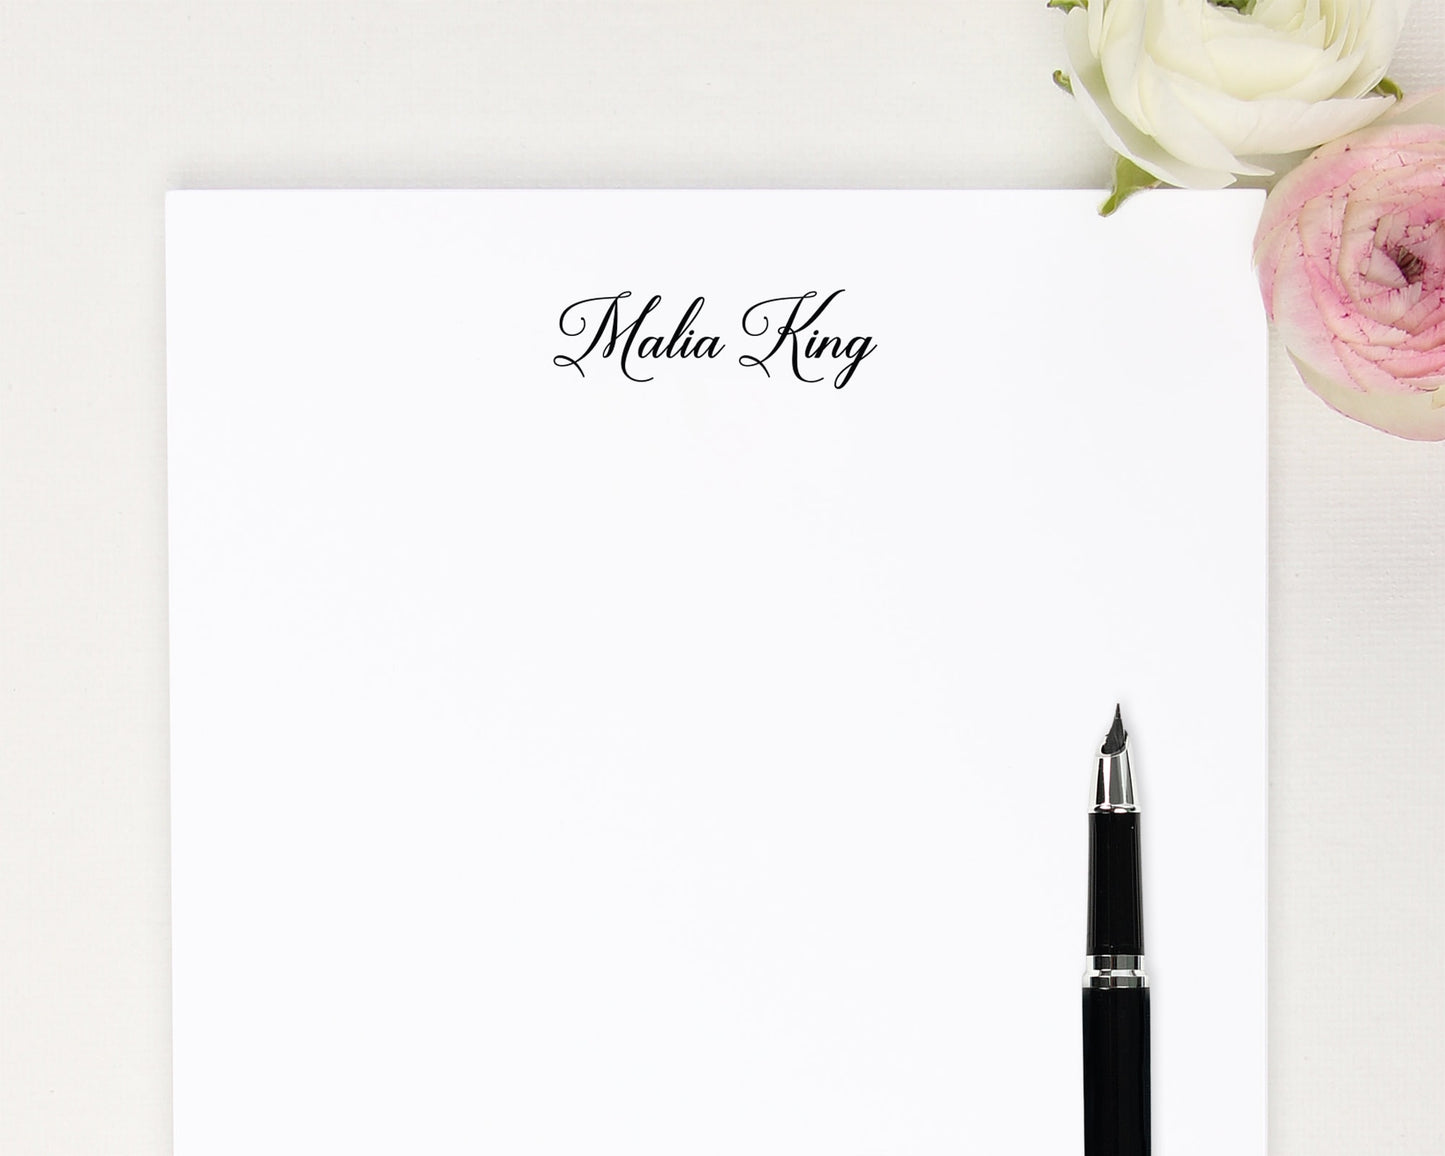 Personalized Notepad